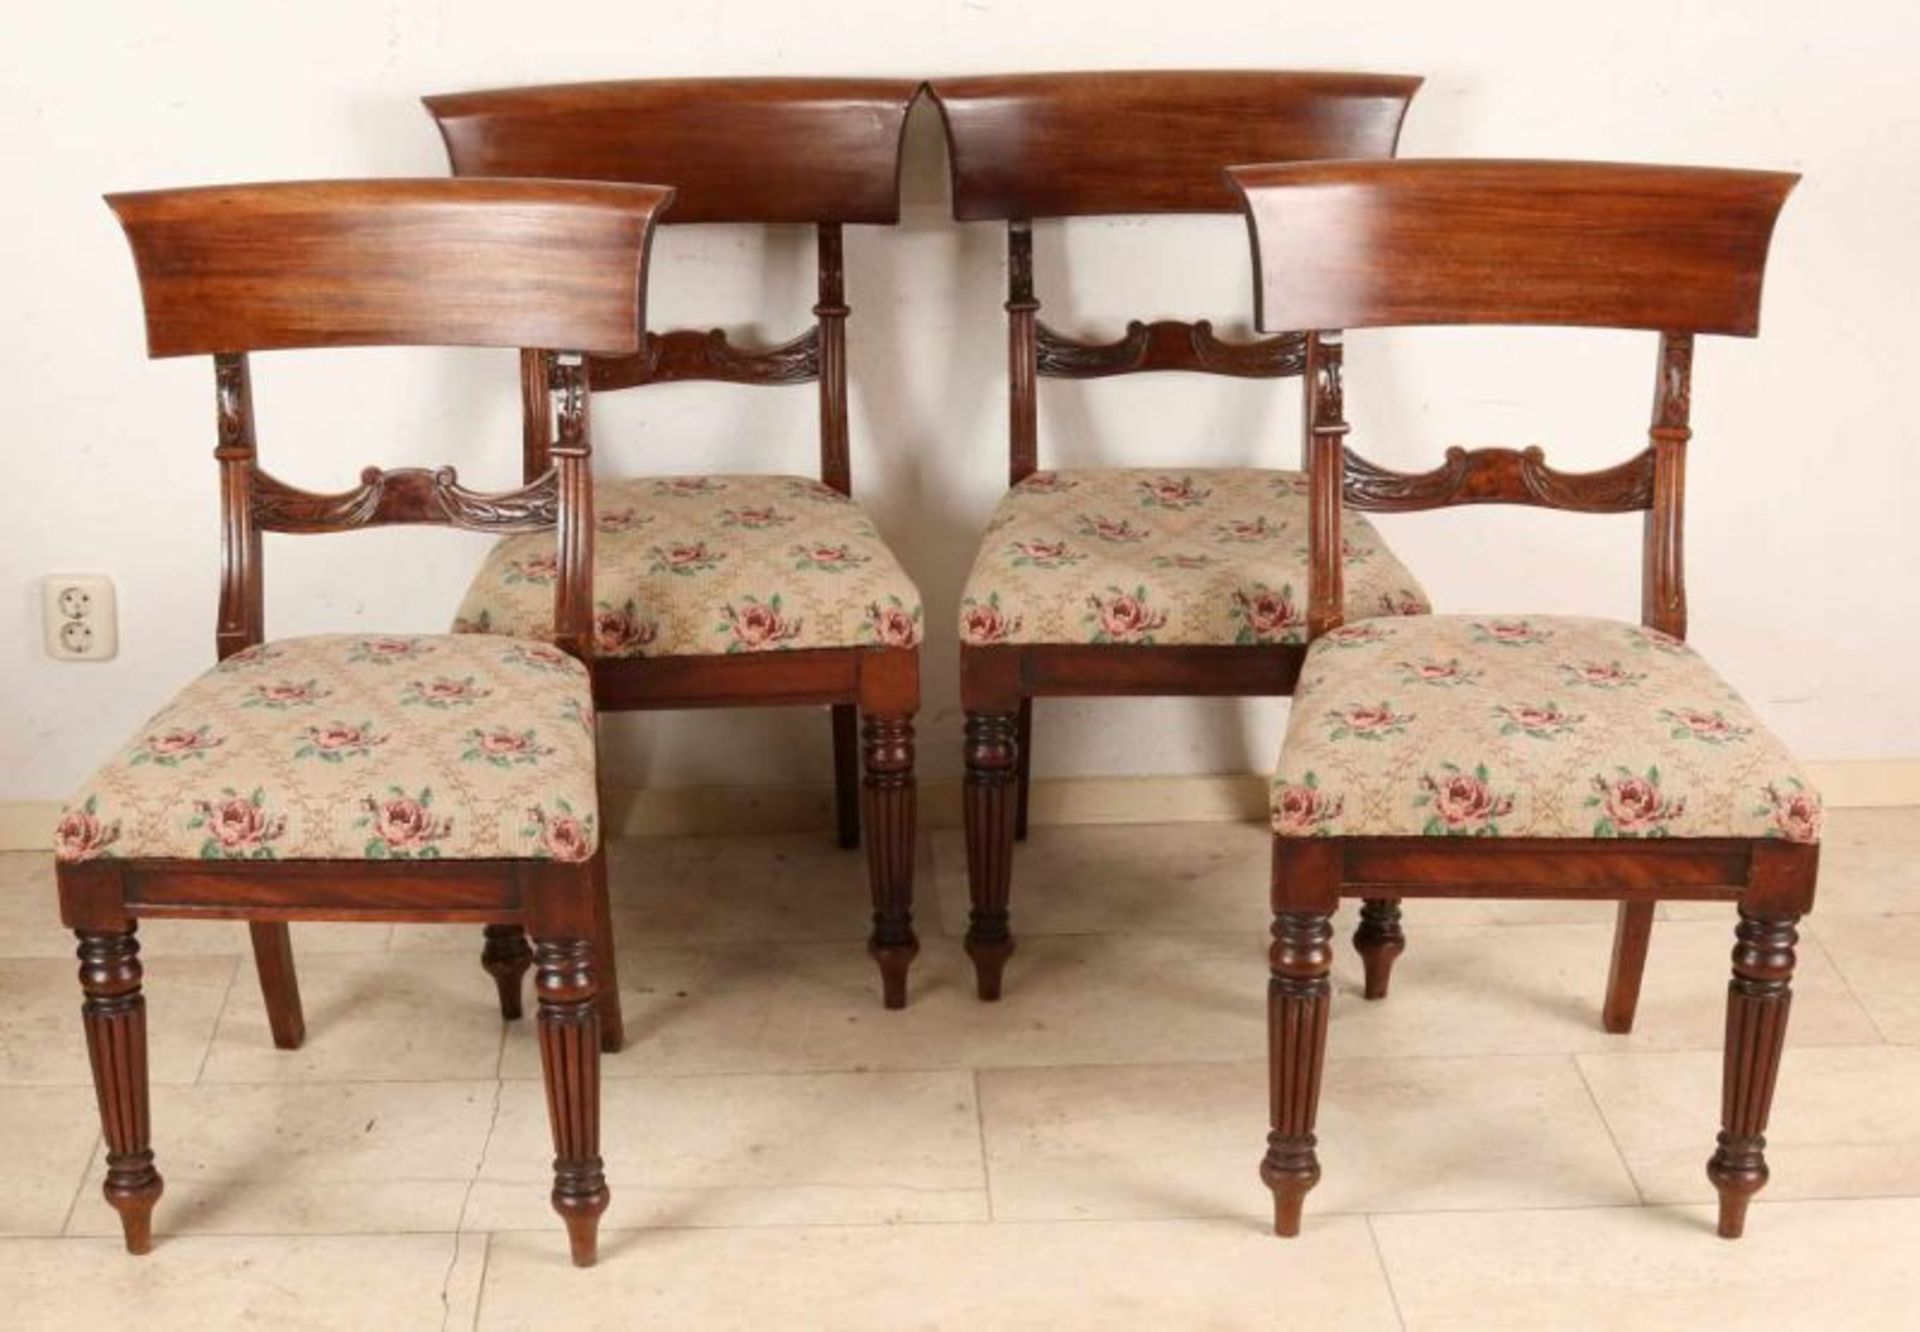 Four 19th century English mahogany chairs with petit point upholstery. Size: 90 x 54 x 44 cm. In